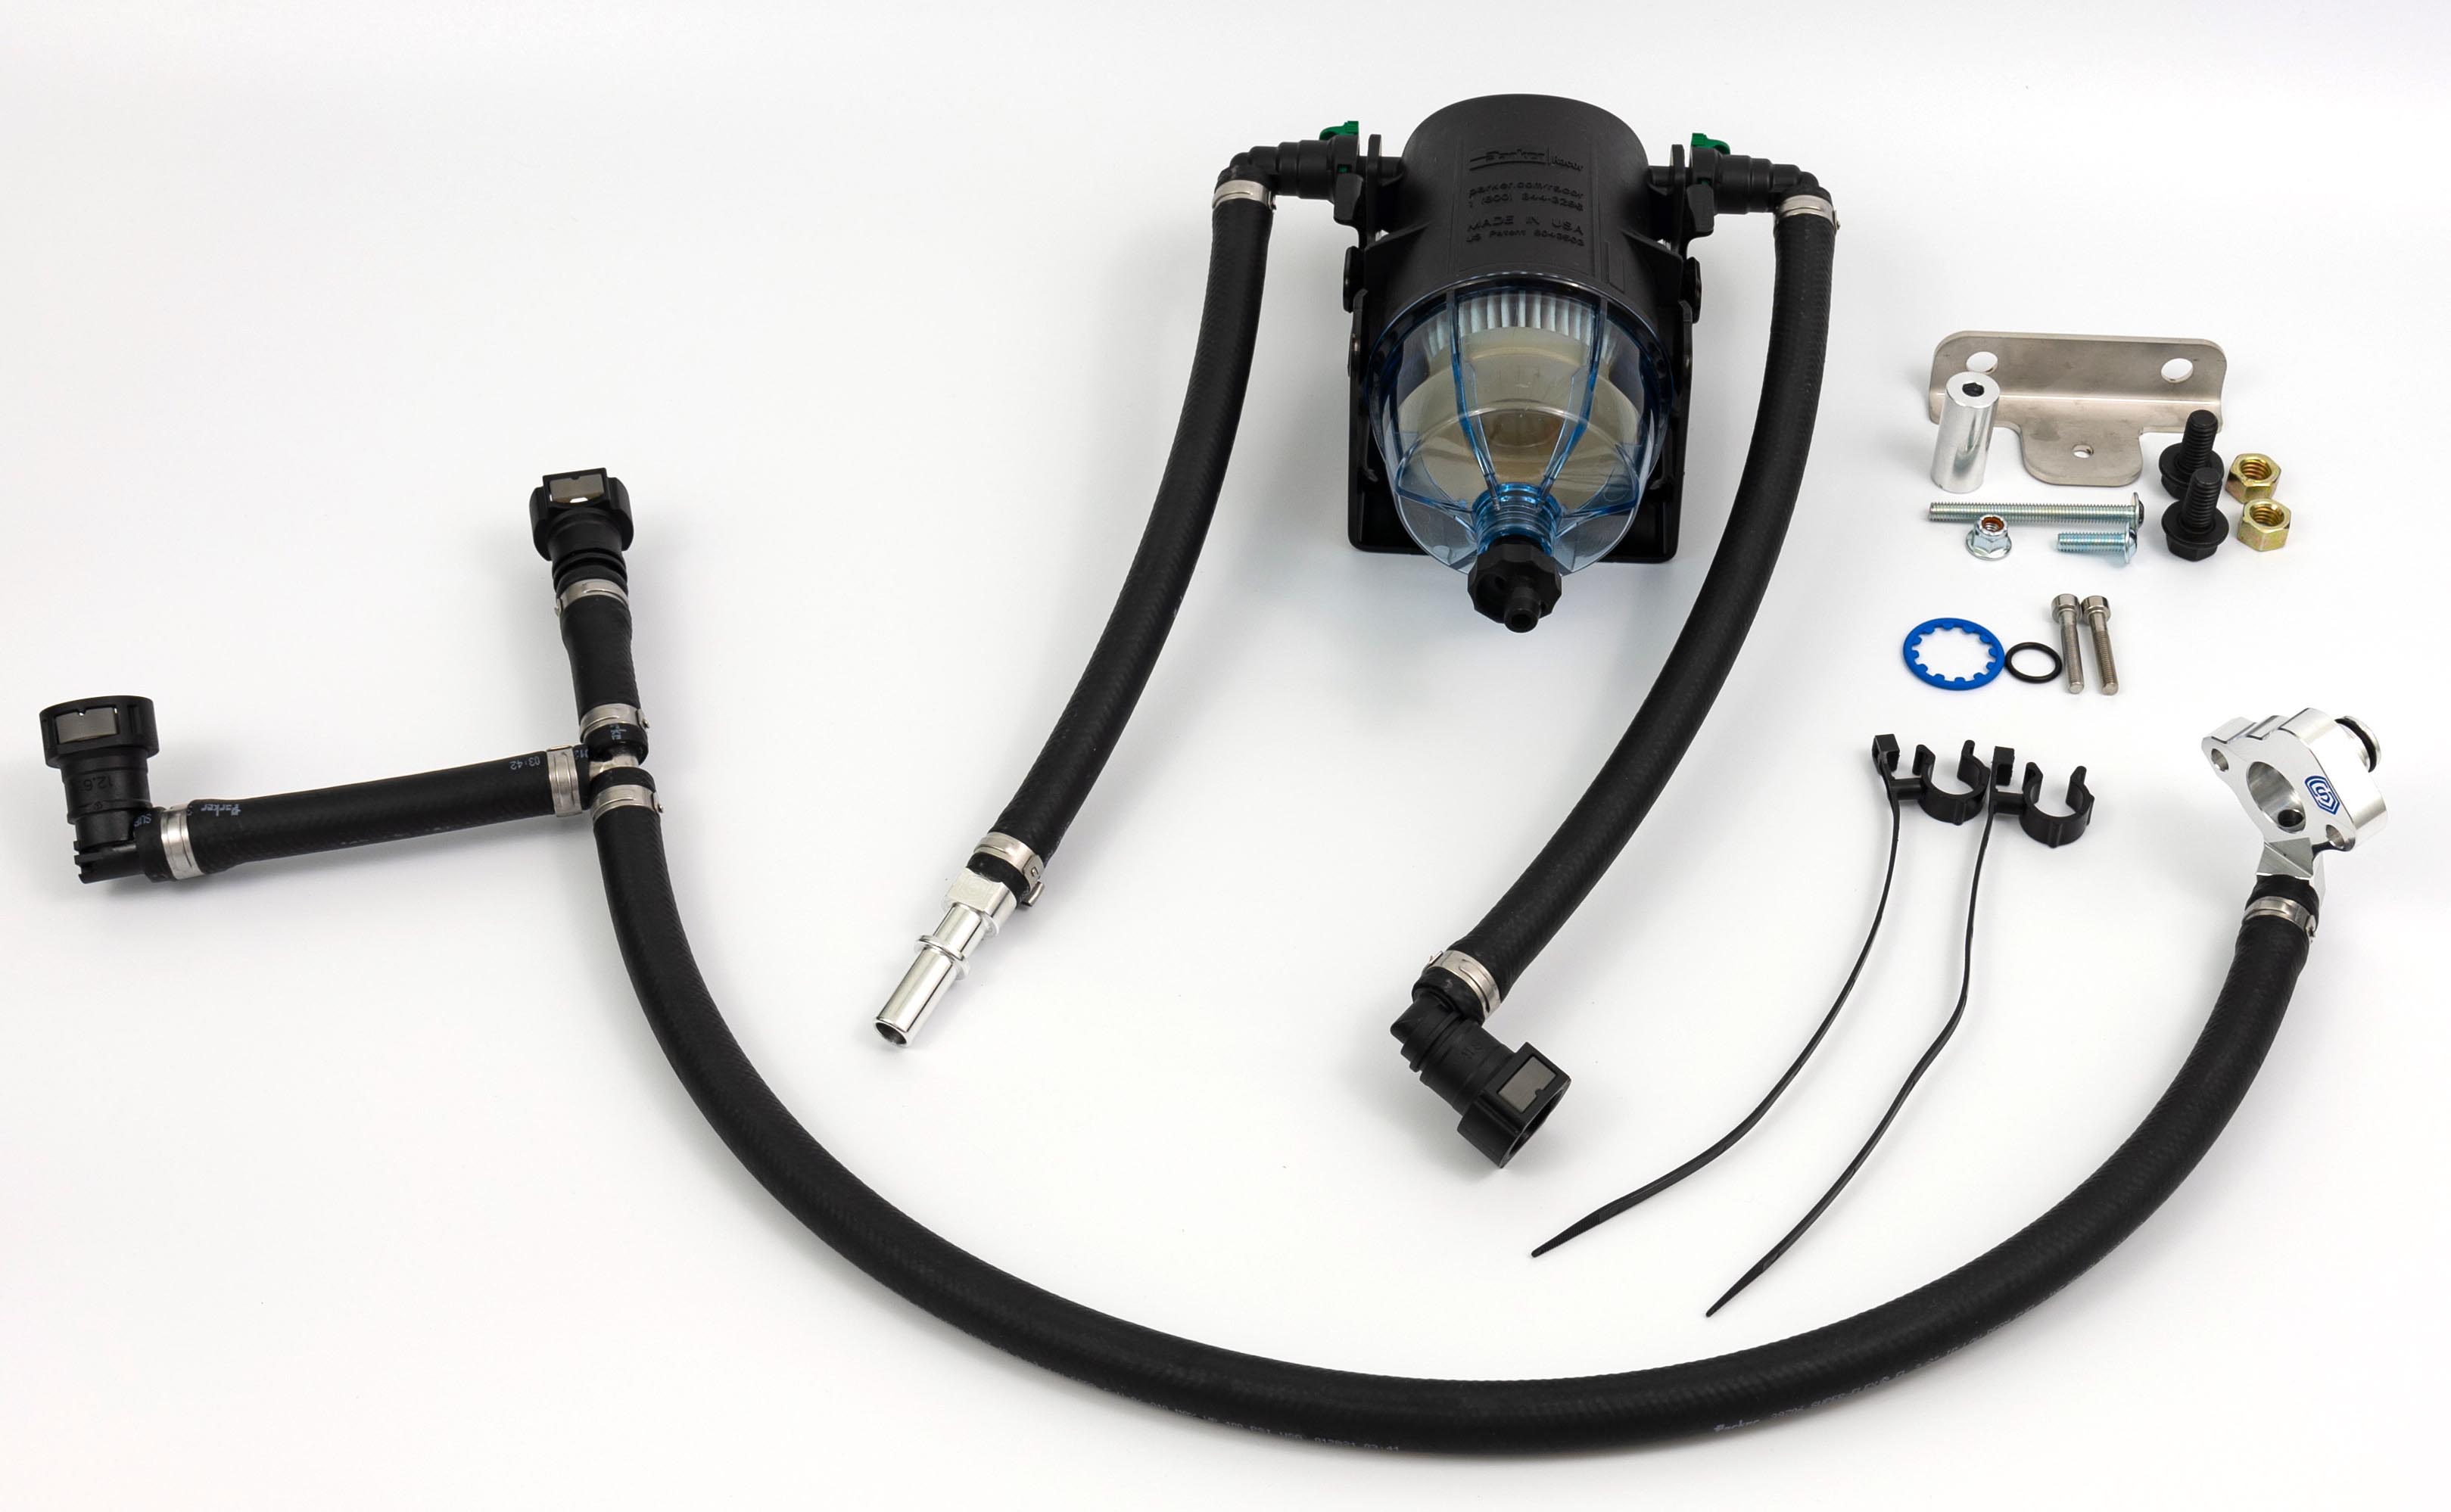 Gen2.1 2011+ 6.7L Power Stroke CP4.2 Bypass Kit with Return Filter Assembly